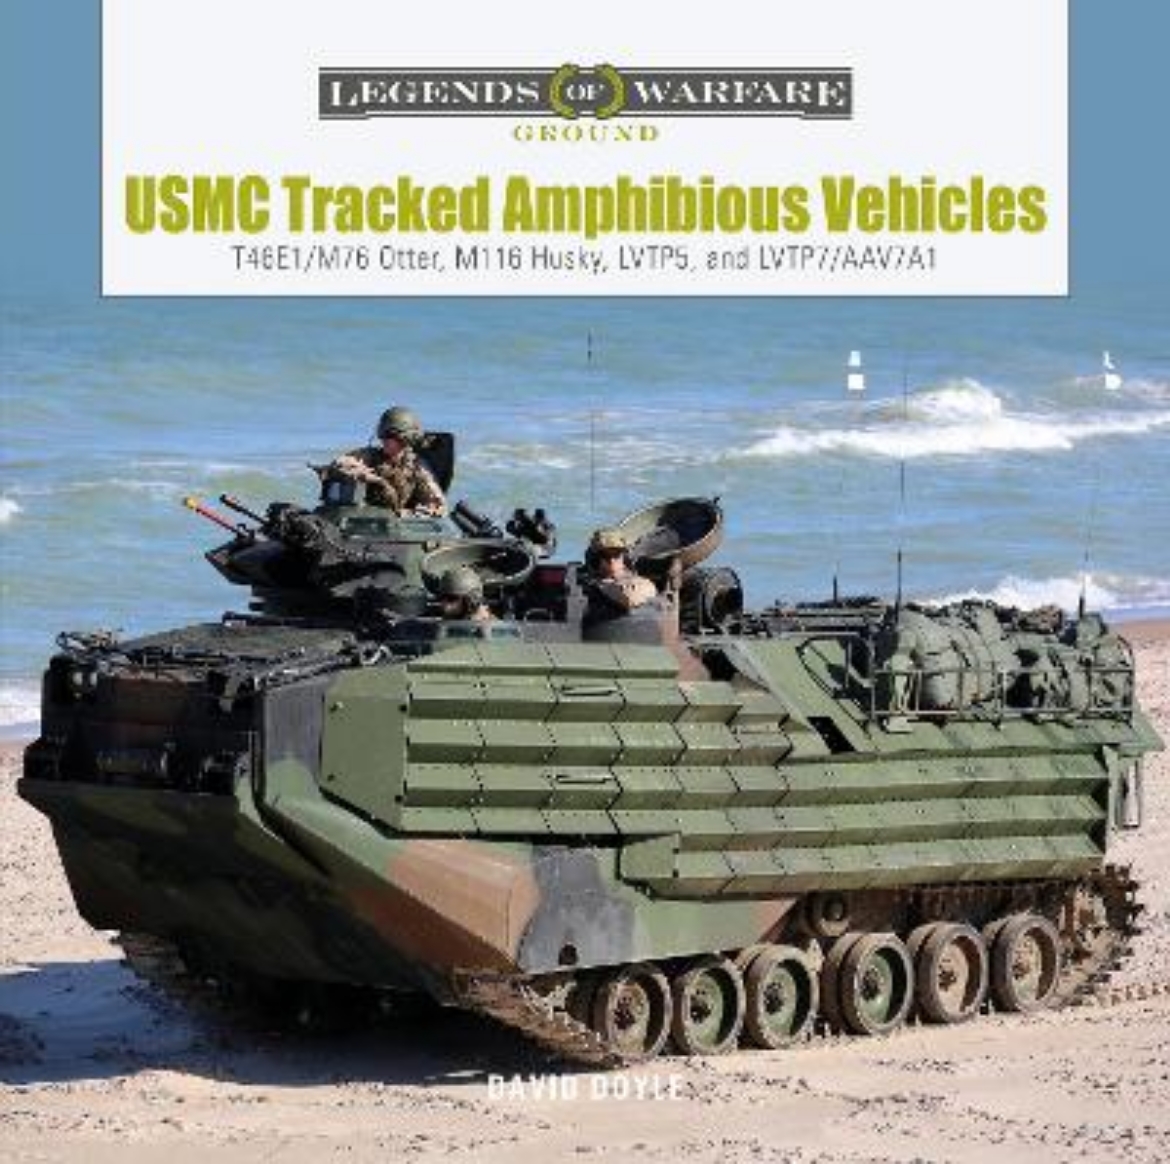 Picture of USMC Tracked Amphibious Vehicles: T46E1/M76 Otter, M116 Husky, LVTP5, and LVTP7/AAV7A1